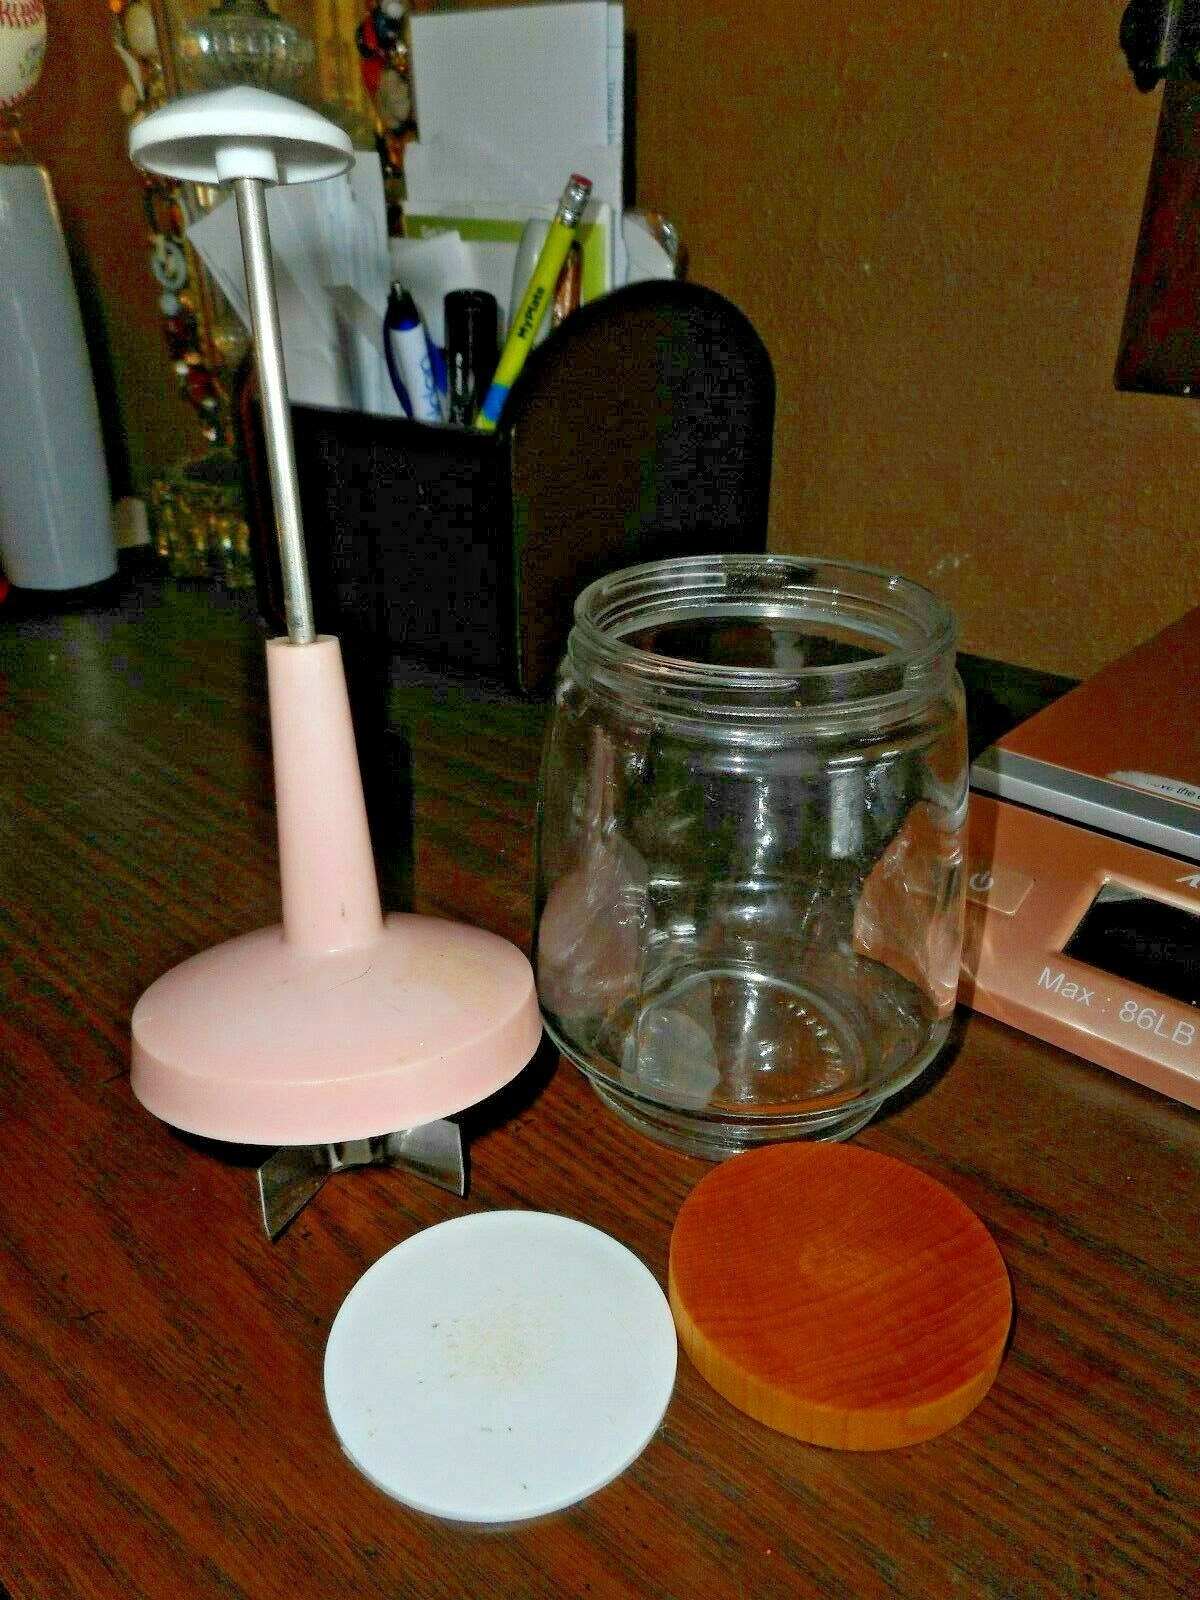 FEDERAL HOUSEWARE 1950s Pink Nut Onion Chopper CHICAGO IL Plastic and Glass - $23.74